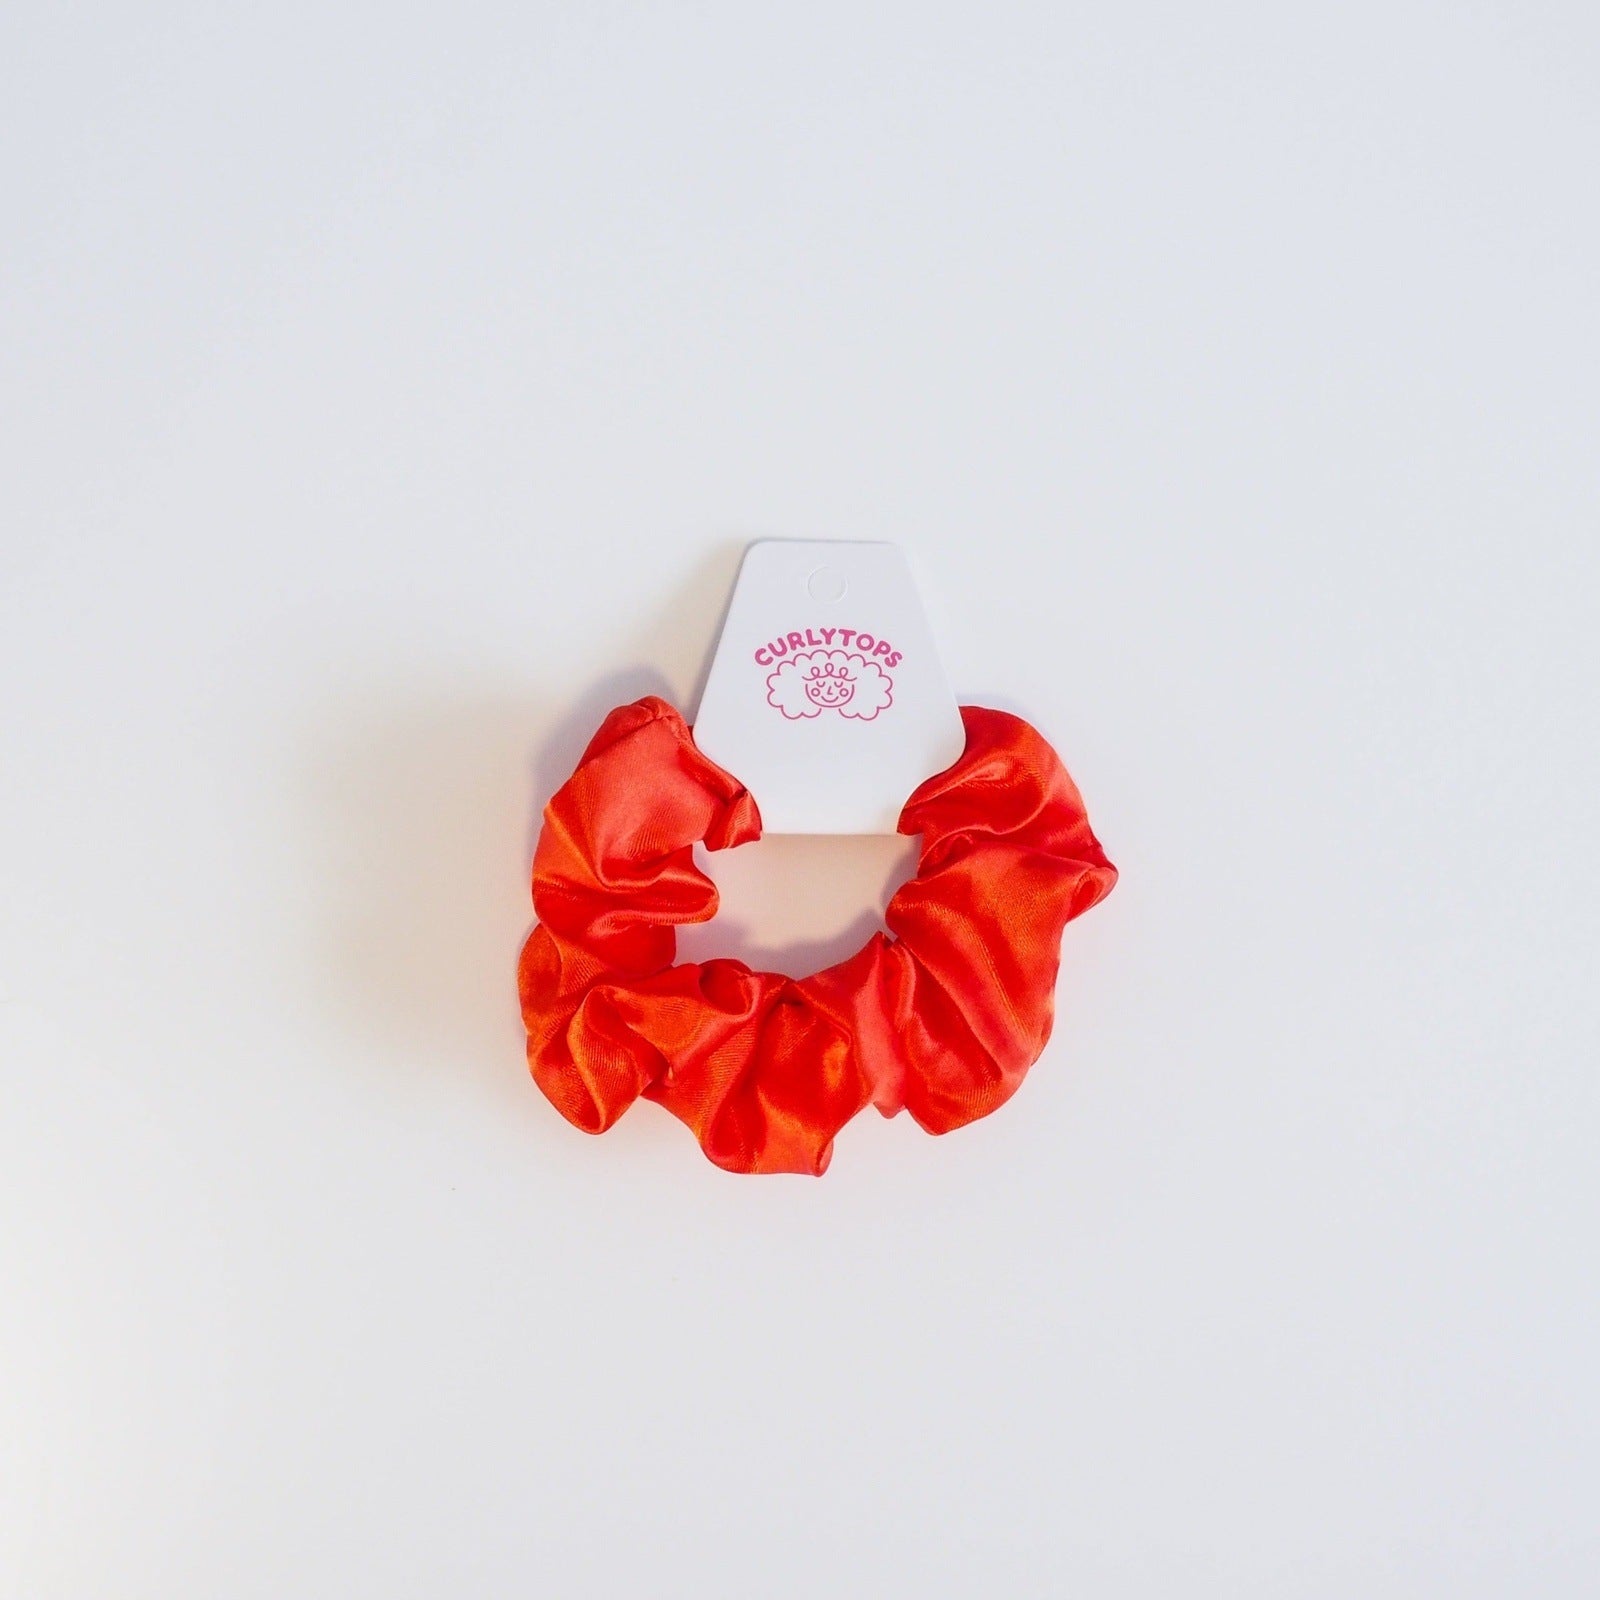 Curlytops Red Satin Hair Scrunchie for curly hair protection 